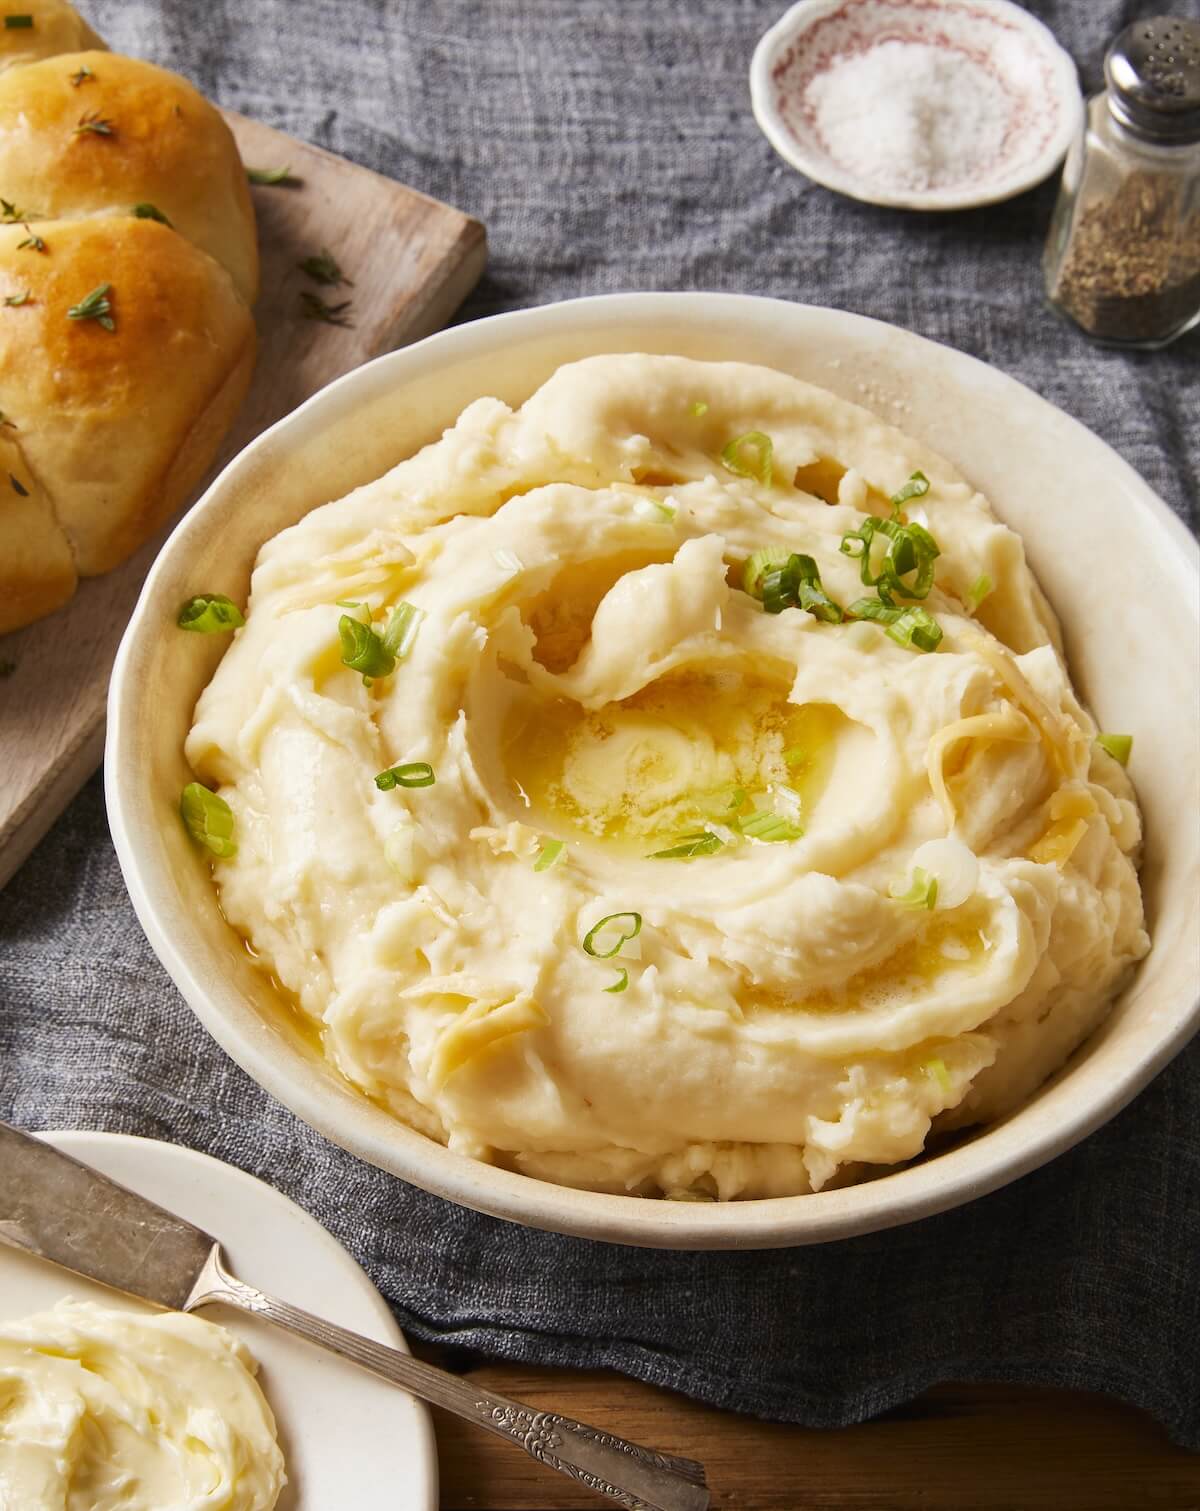 bowl of mashed potatoes with butter on a linen covered table.